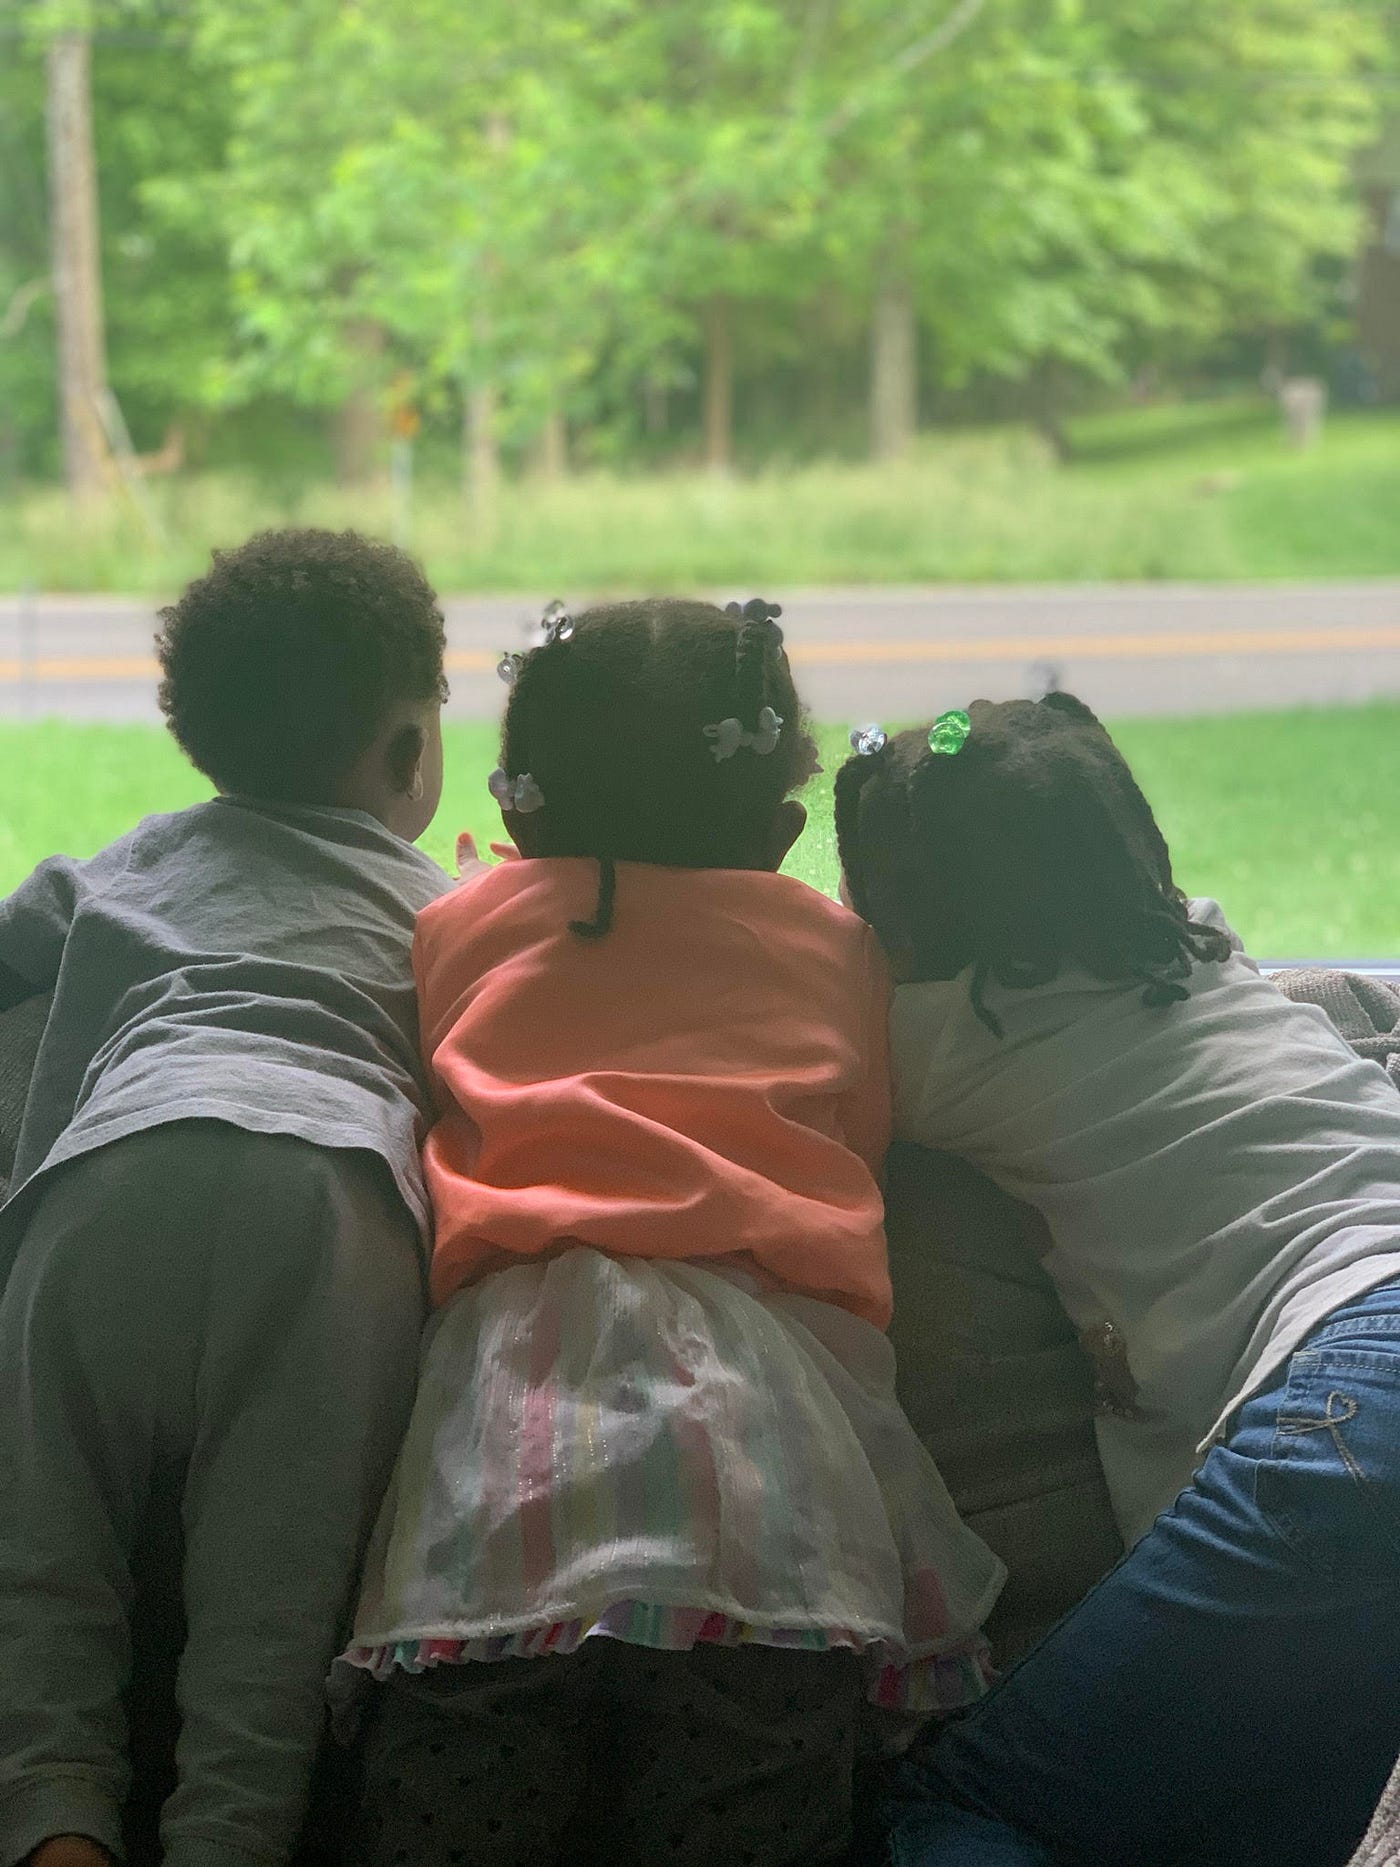 3 young Black children seen from behind, looking out the window at grass and a road.